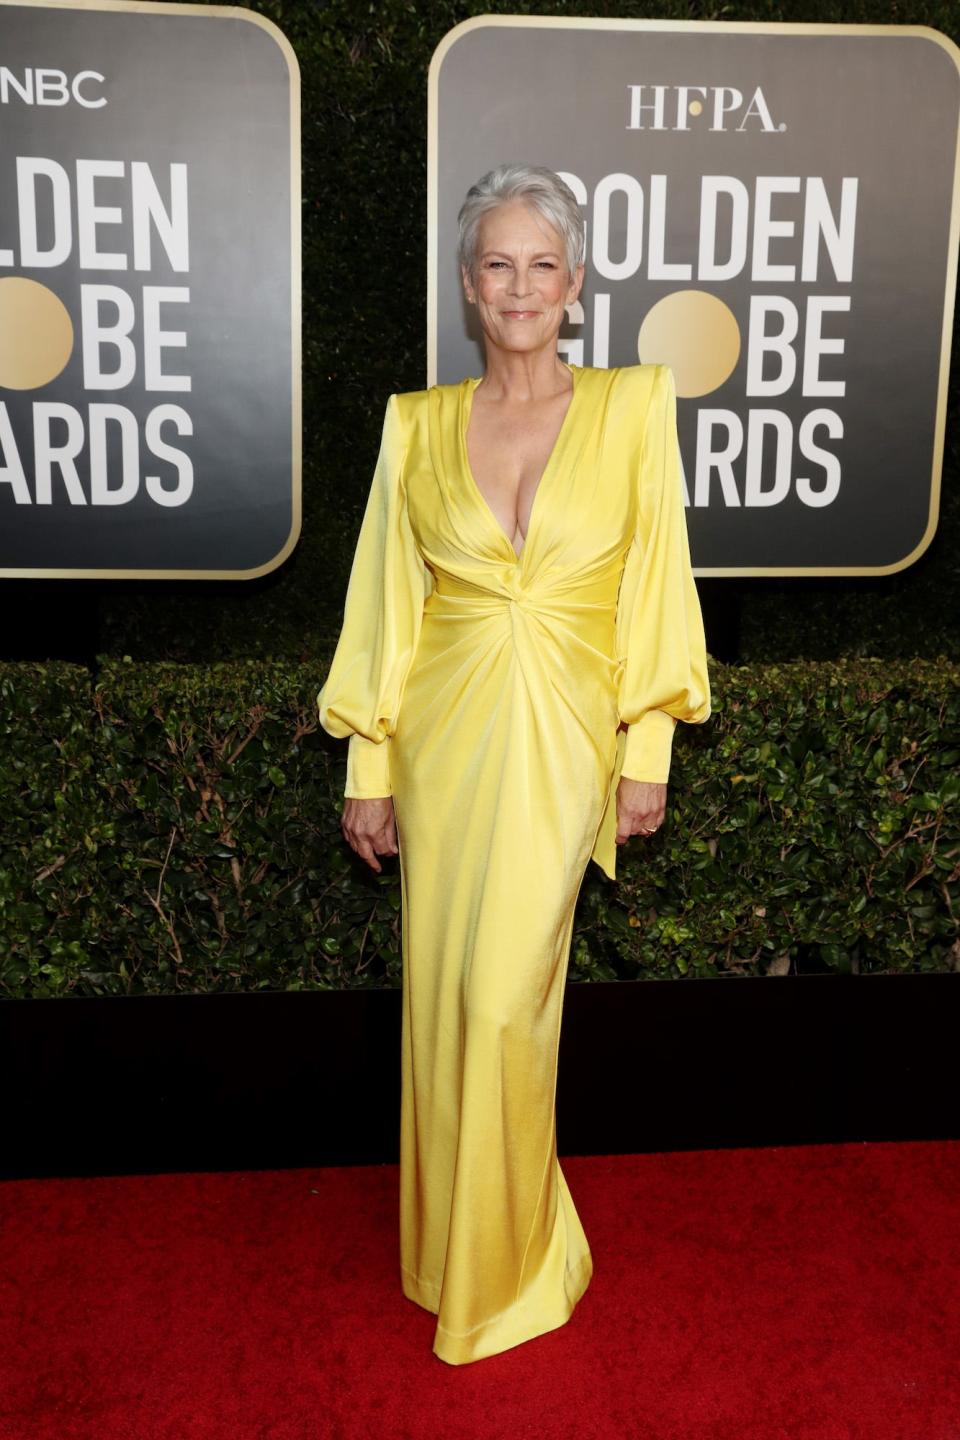 Jamie Lee Curtis at the Golden Globe Awards on February 28, 2021.